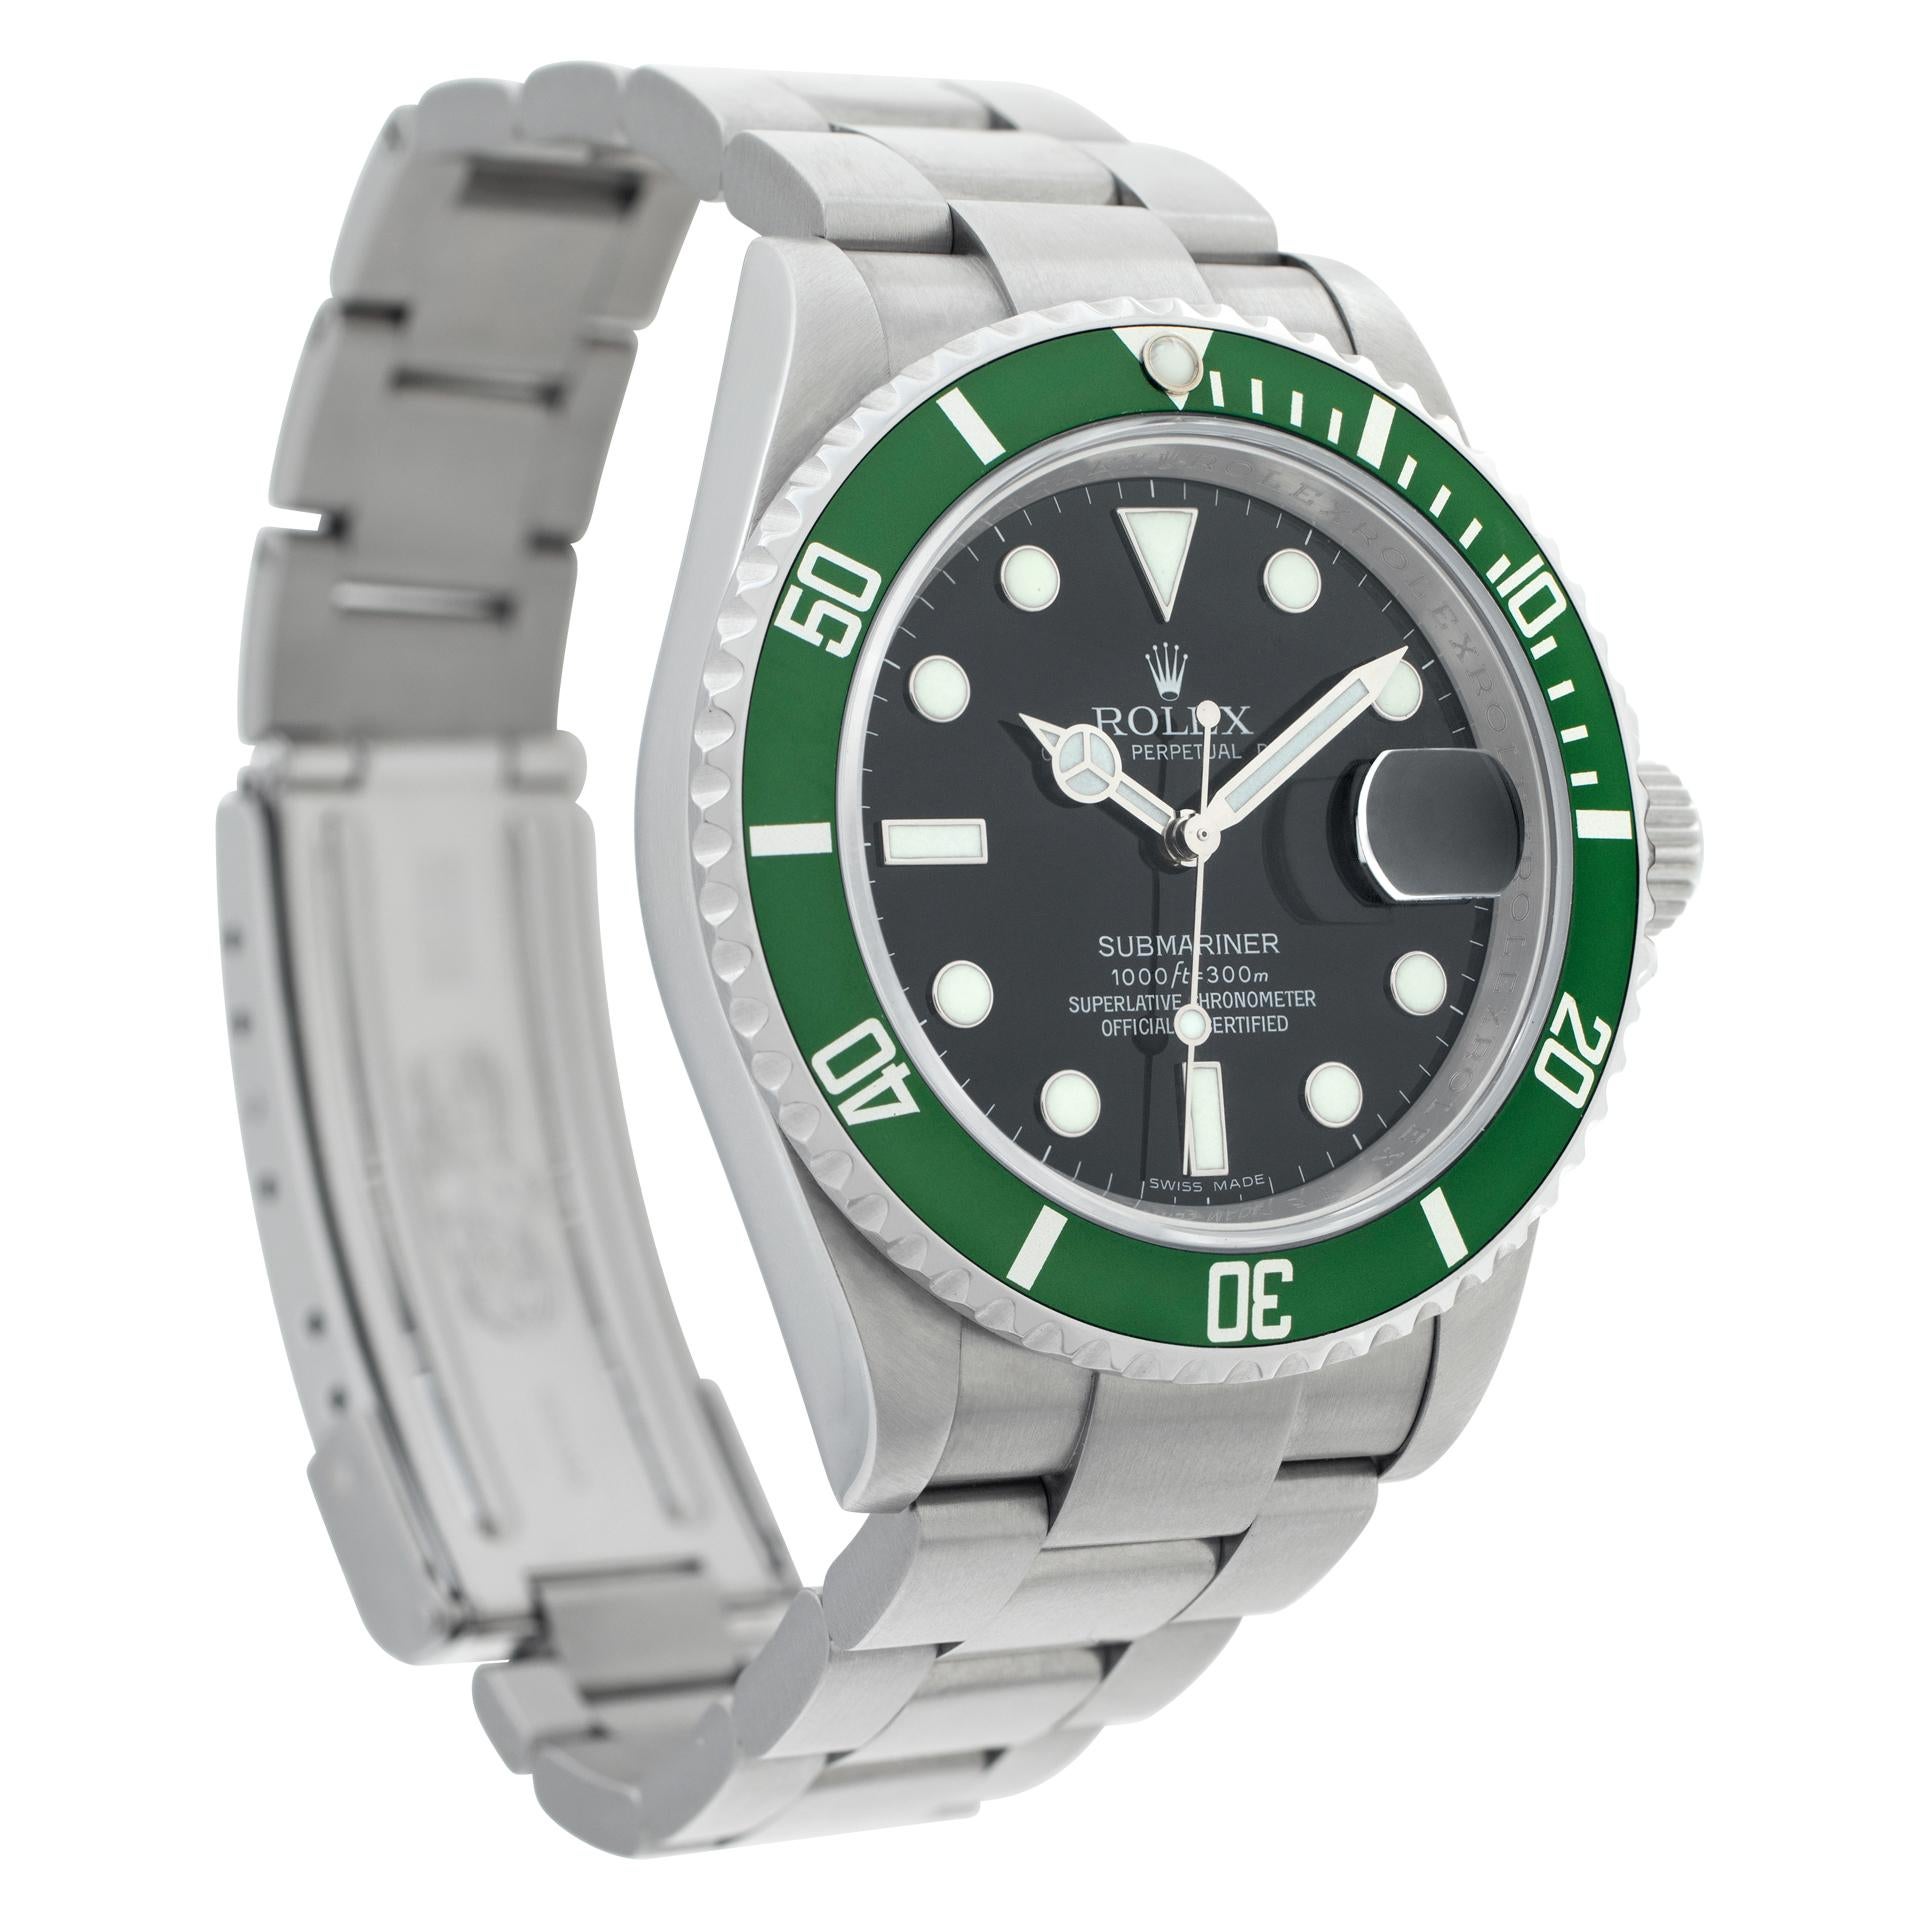 Rolex Submariner Kermit 16610lv Stainless Steel Black dial 40mm Automatic watch In Excellent Condition For Sale In Surfside, FL